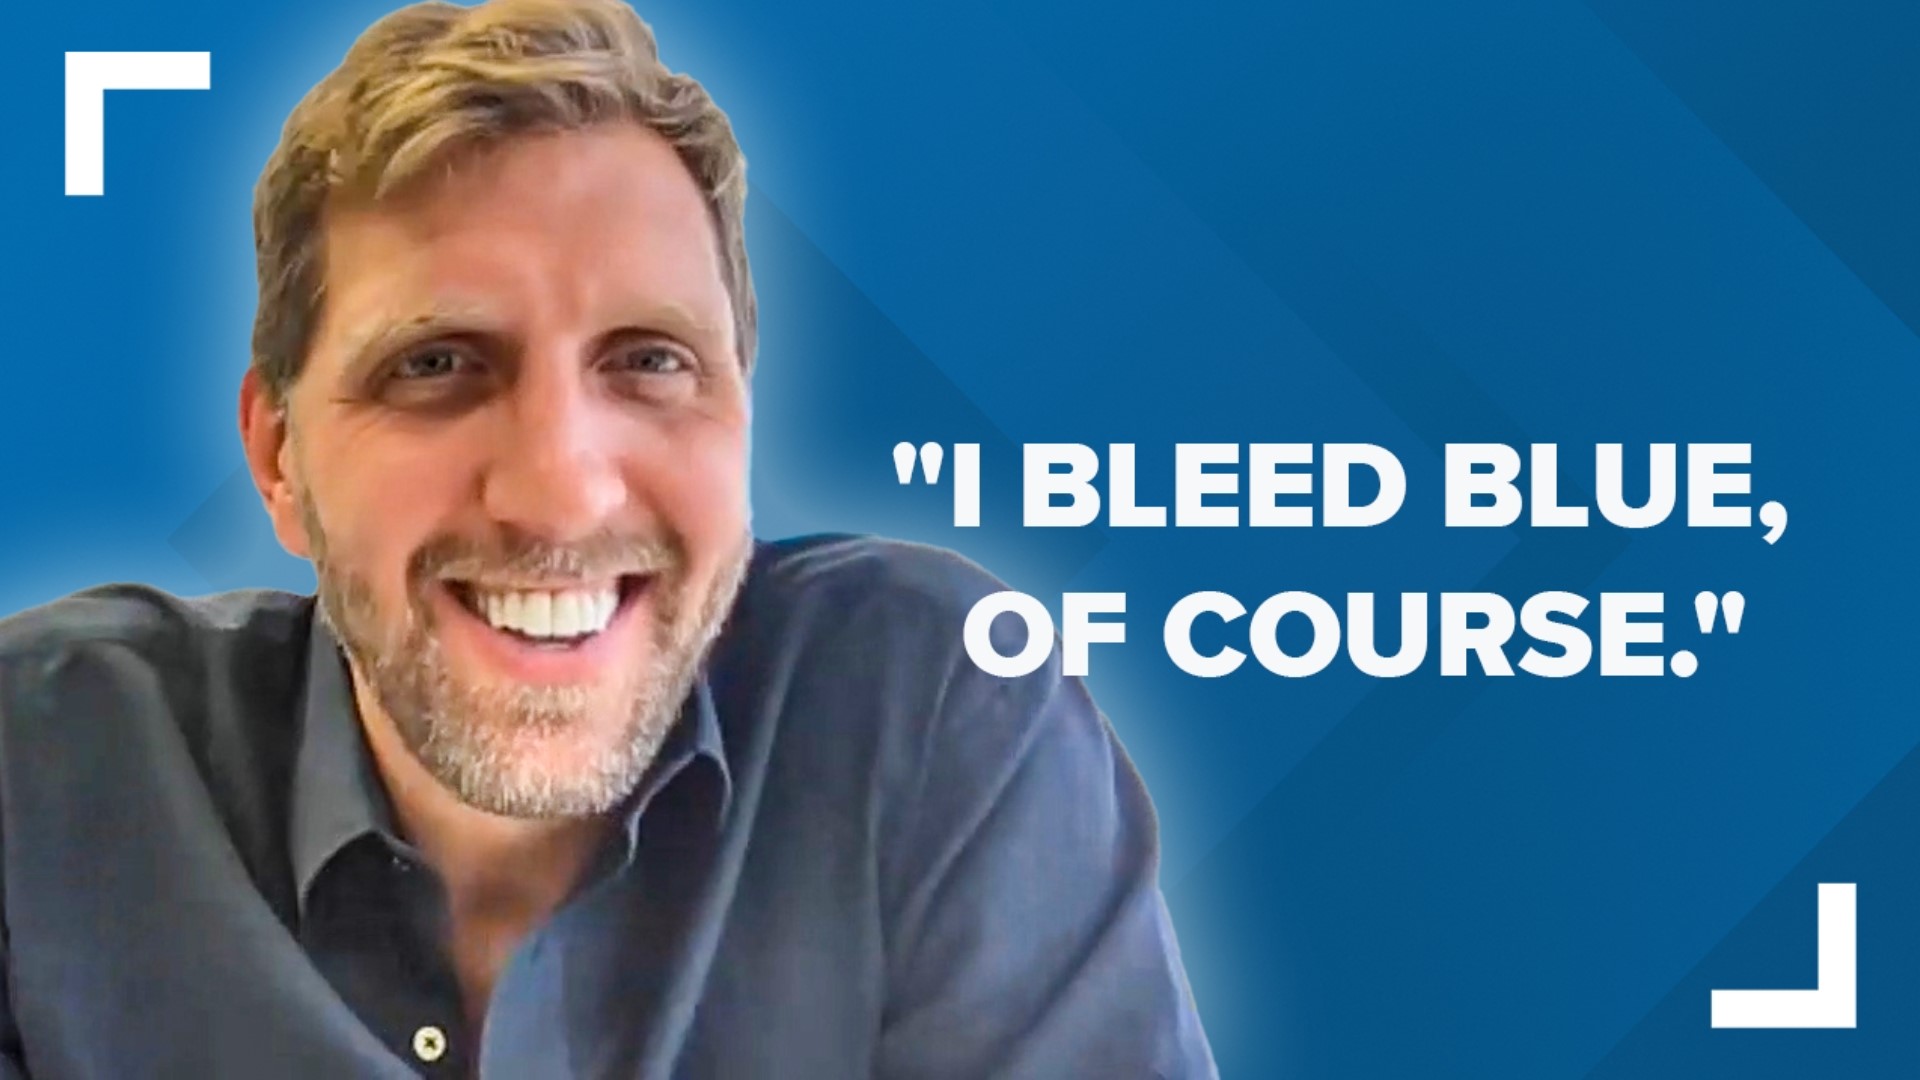 Mavs legend Dirk Nowitzki sat down with WFAA to discuss his upcoming charity tennis tournament, how retirement has been going and the Mavs' upcoming season.